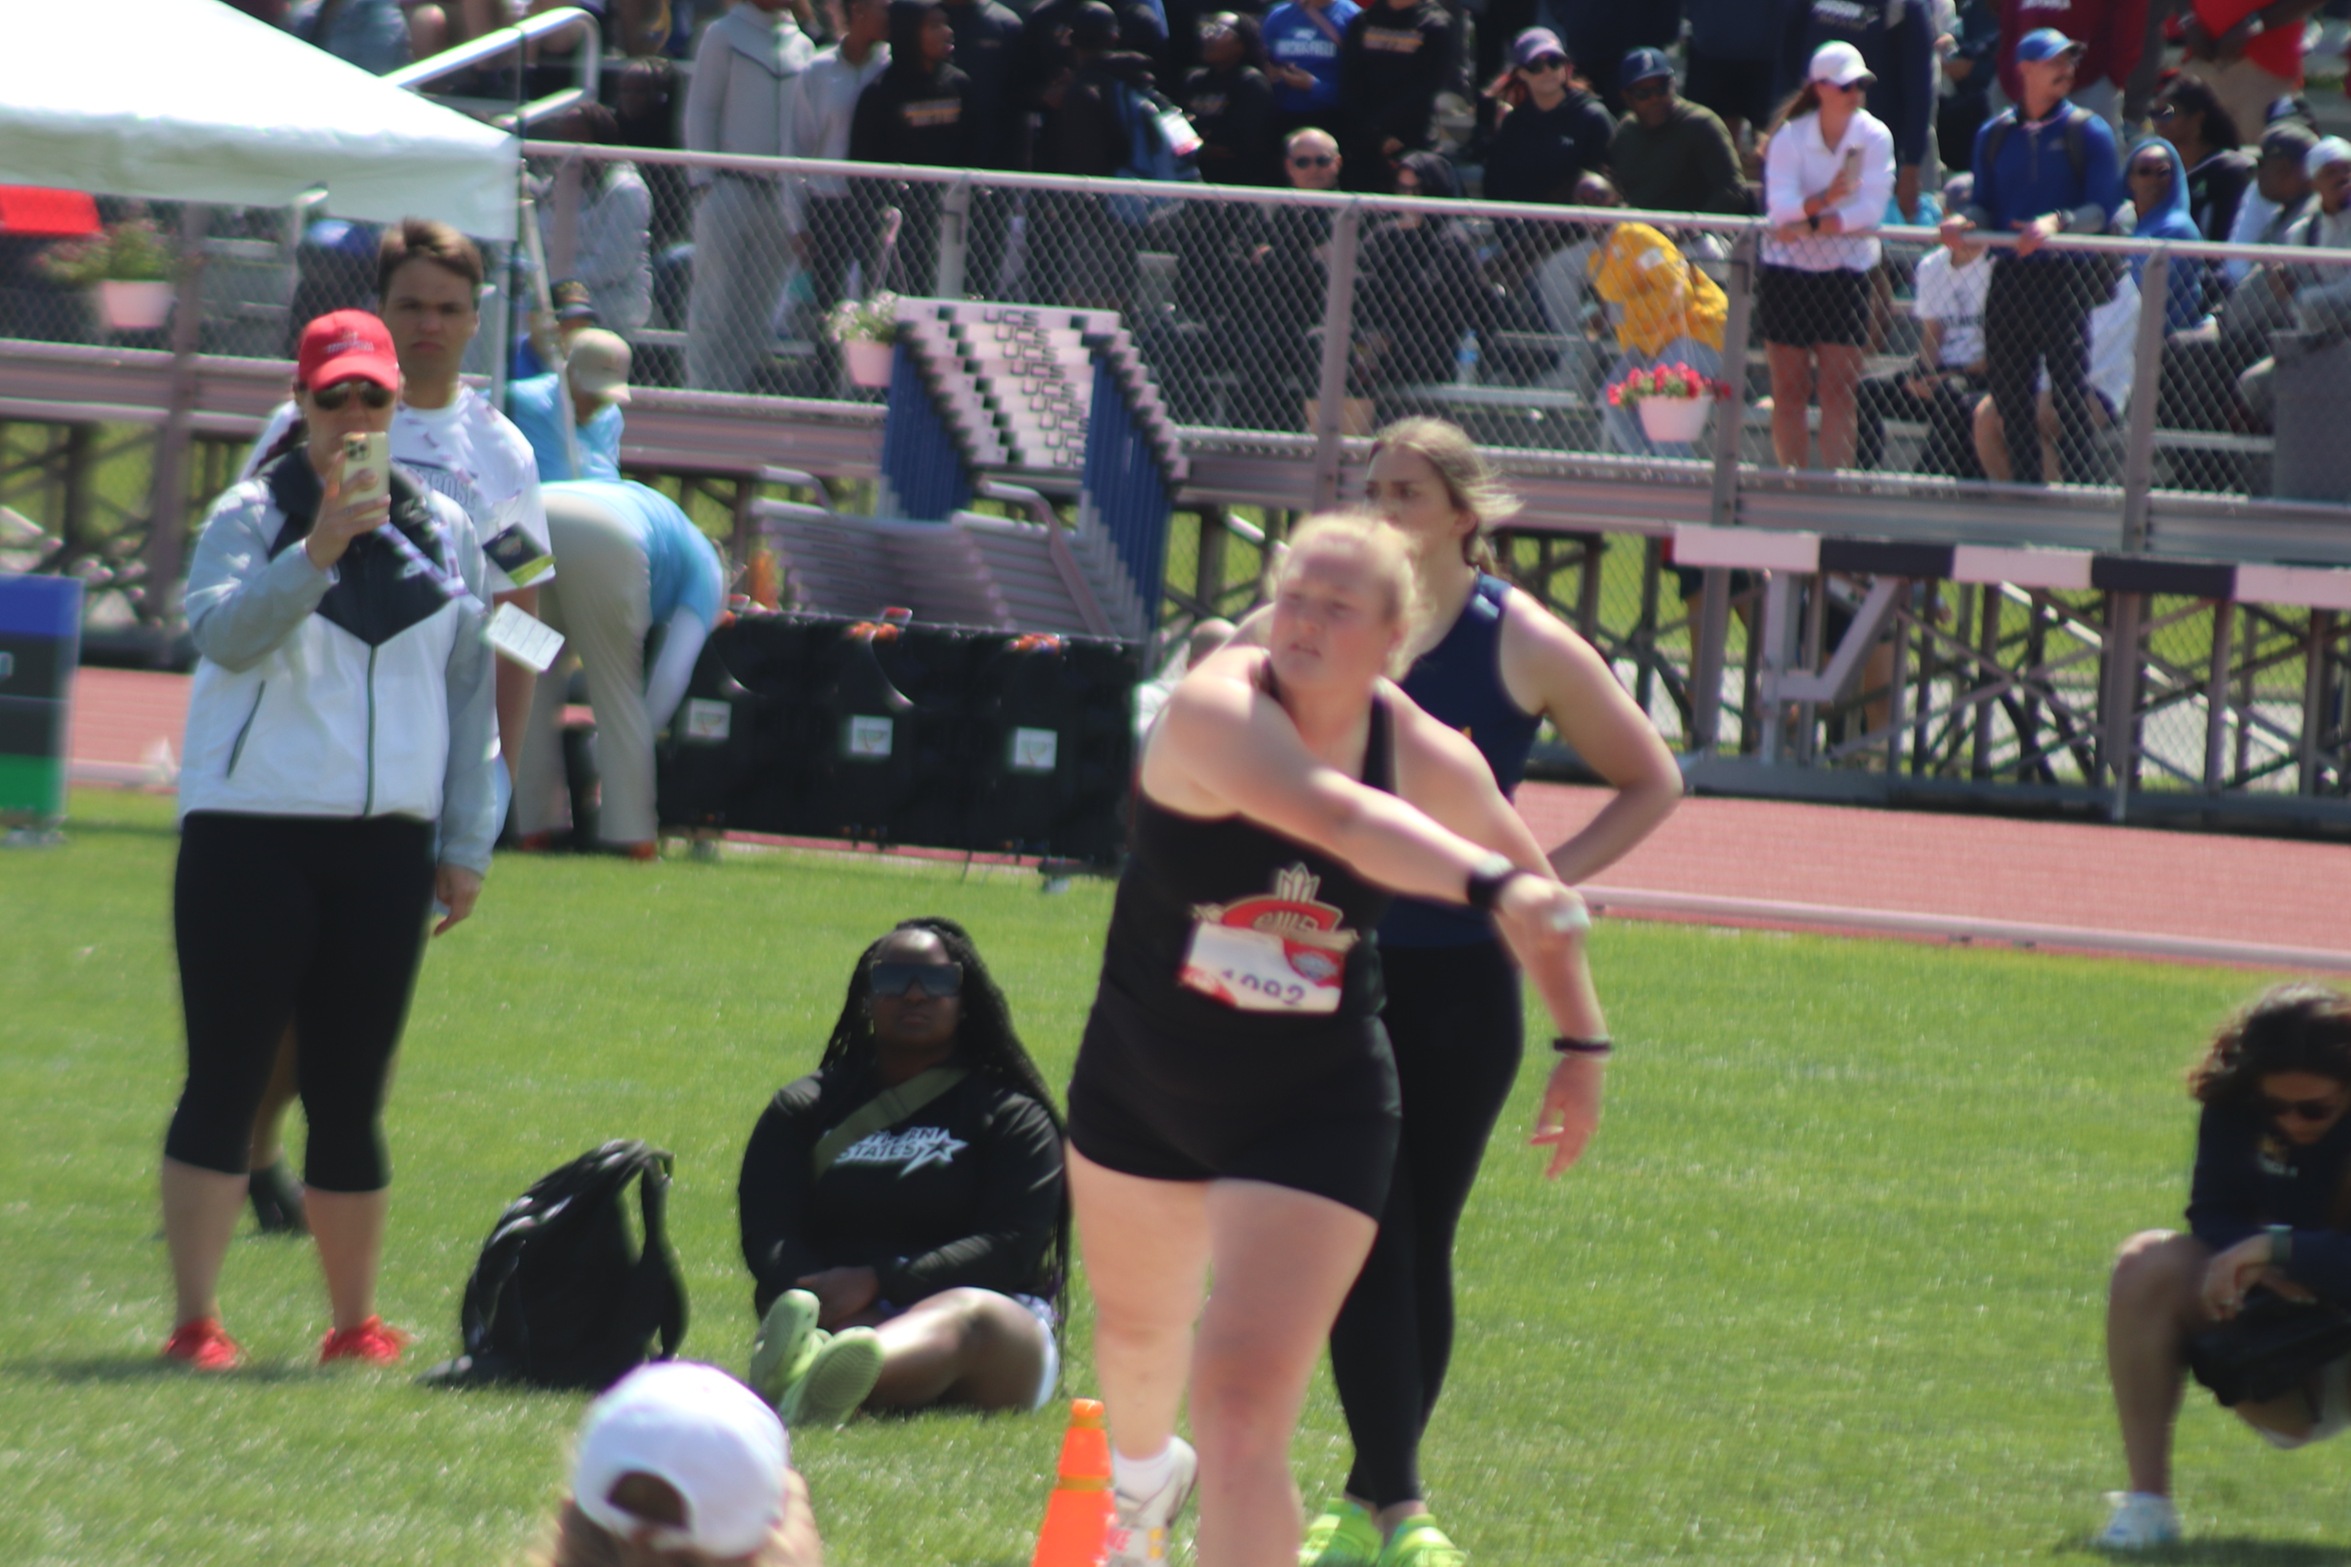 Track & Field's Korte competes on Day 2 of NAIA Track & Field Championships